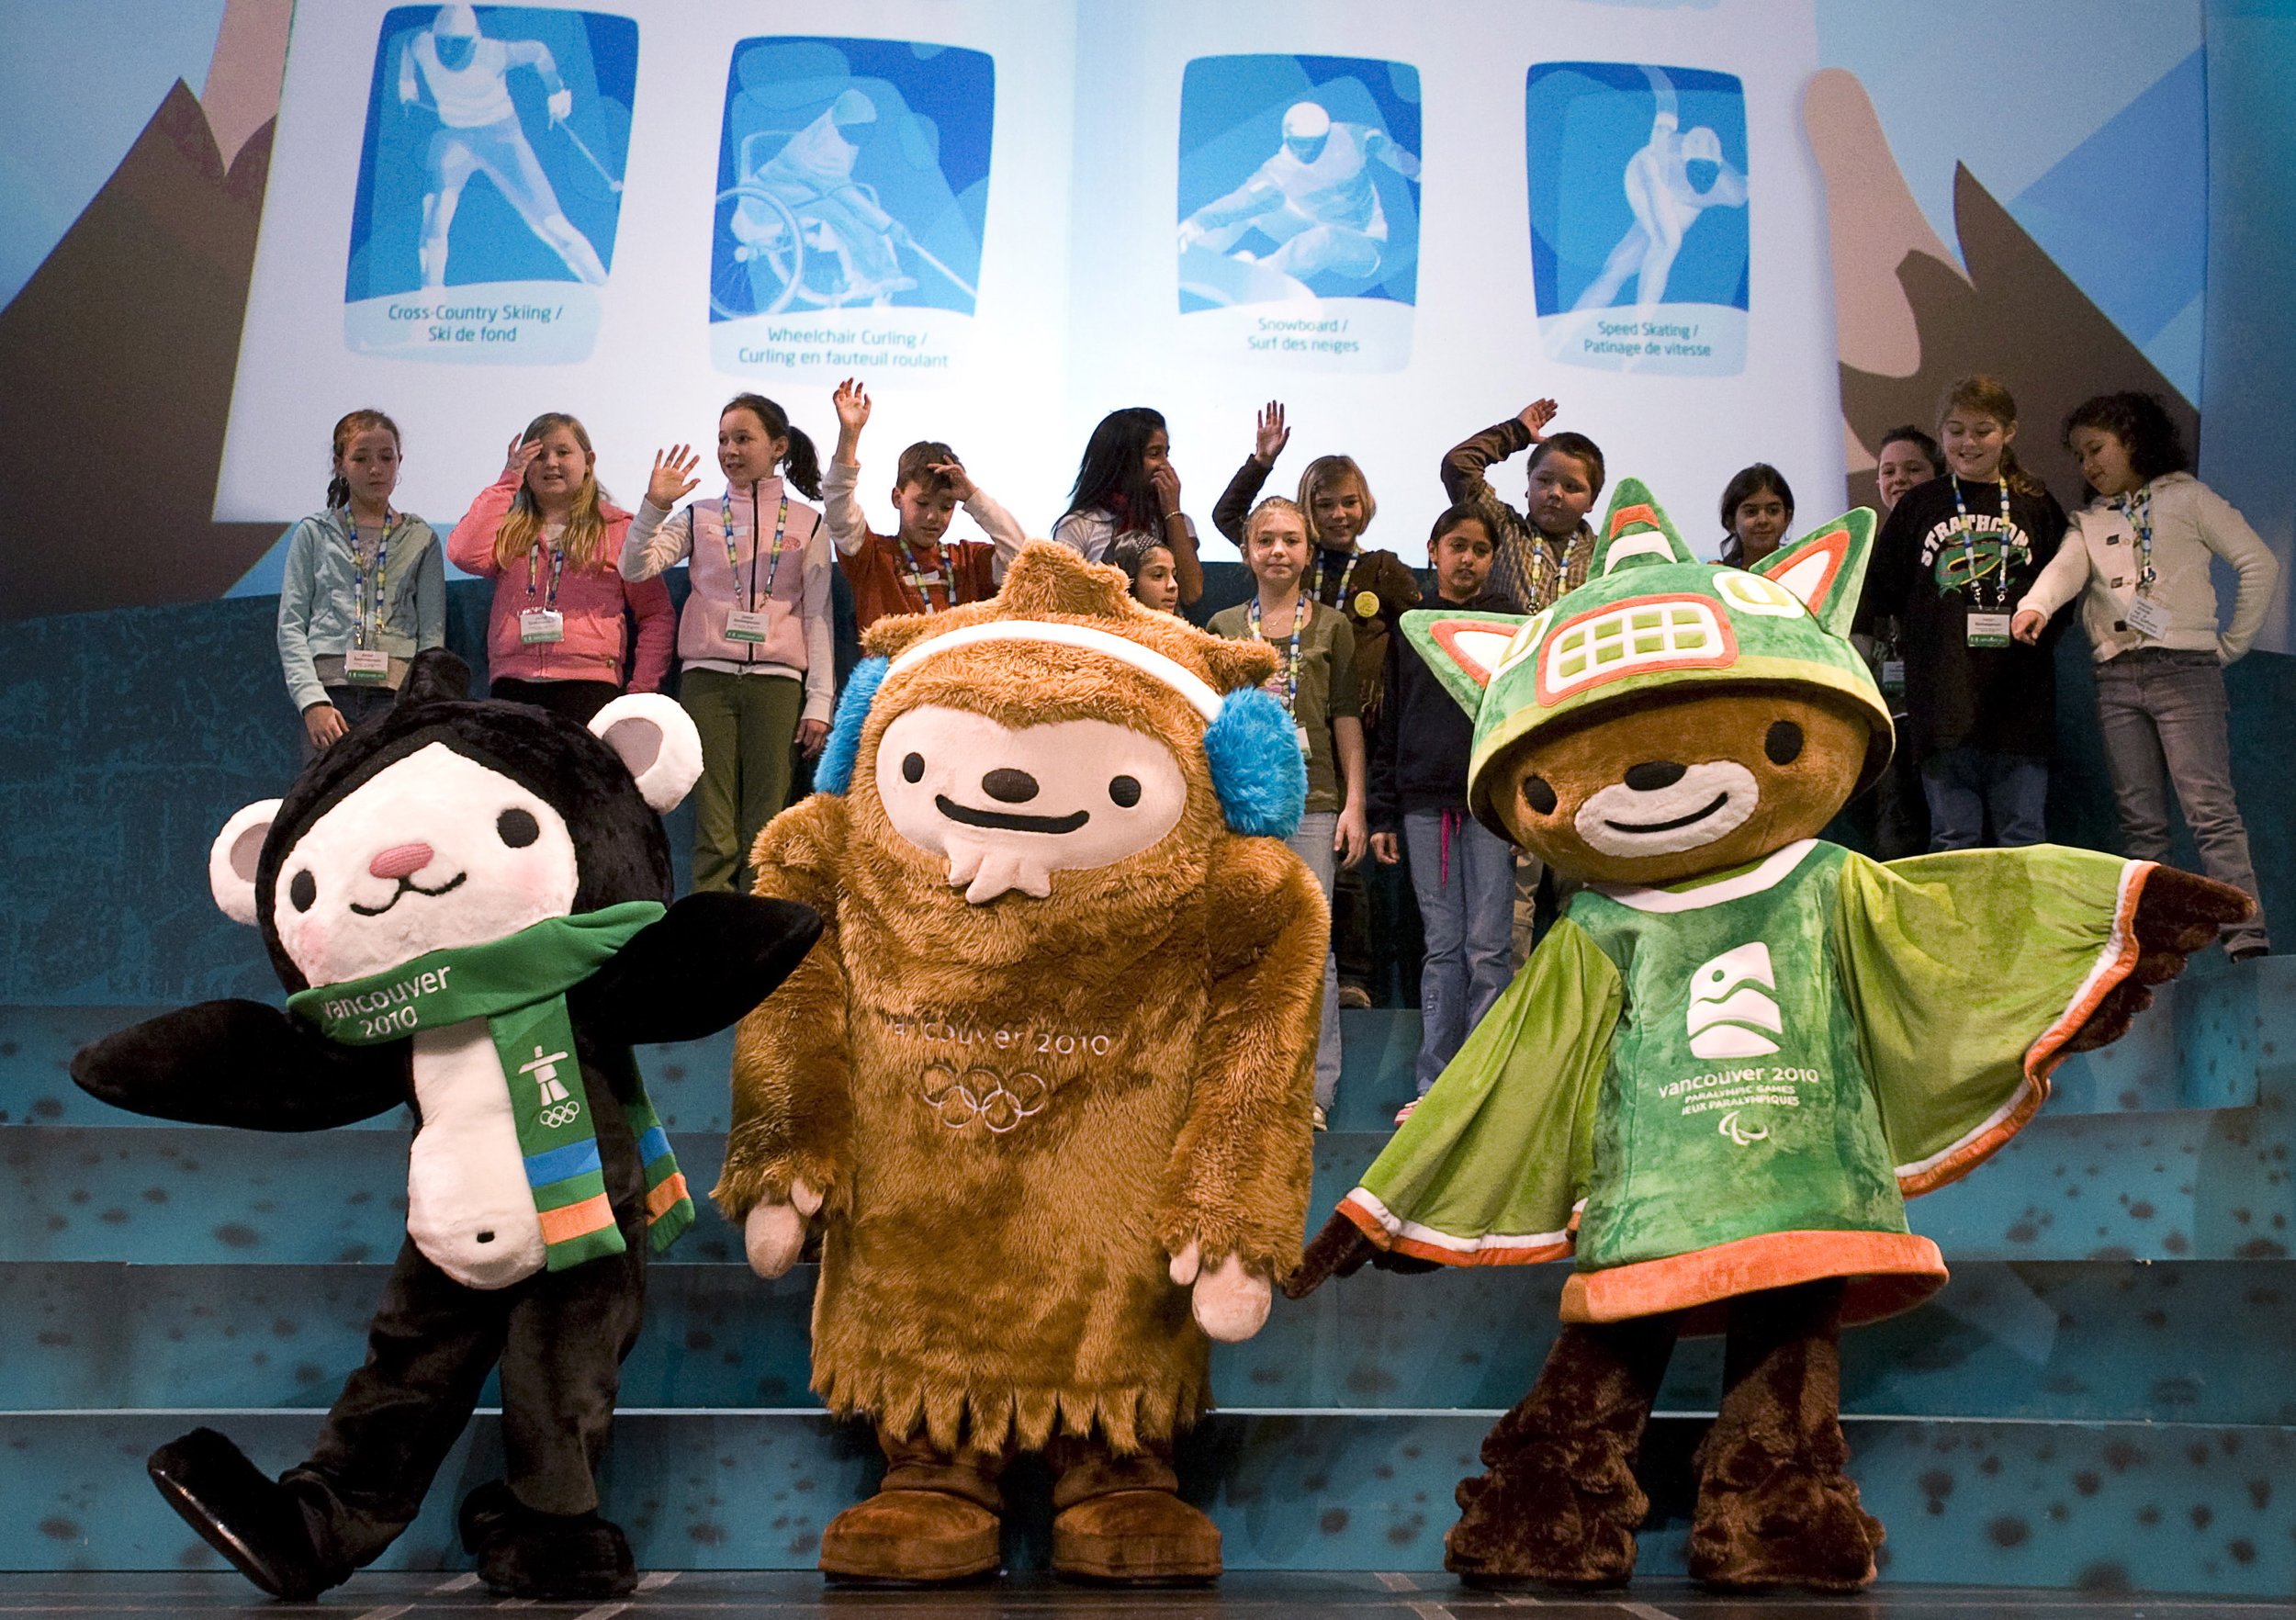  The mascots for the Vancouver 2010 Winter Olympics, from left, Miga, Quatchi and Sumi pose for photographers following their debut to students in Surrey, British Columbia, on Nov. 27, 2007. (Jonathan Hayward/The Canadian Press via AP) 